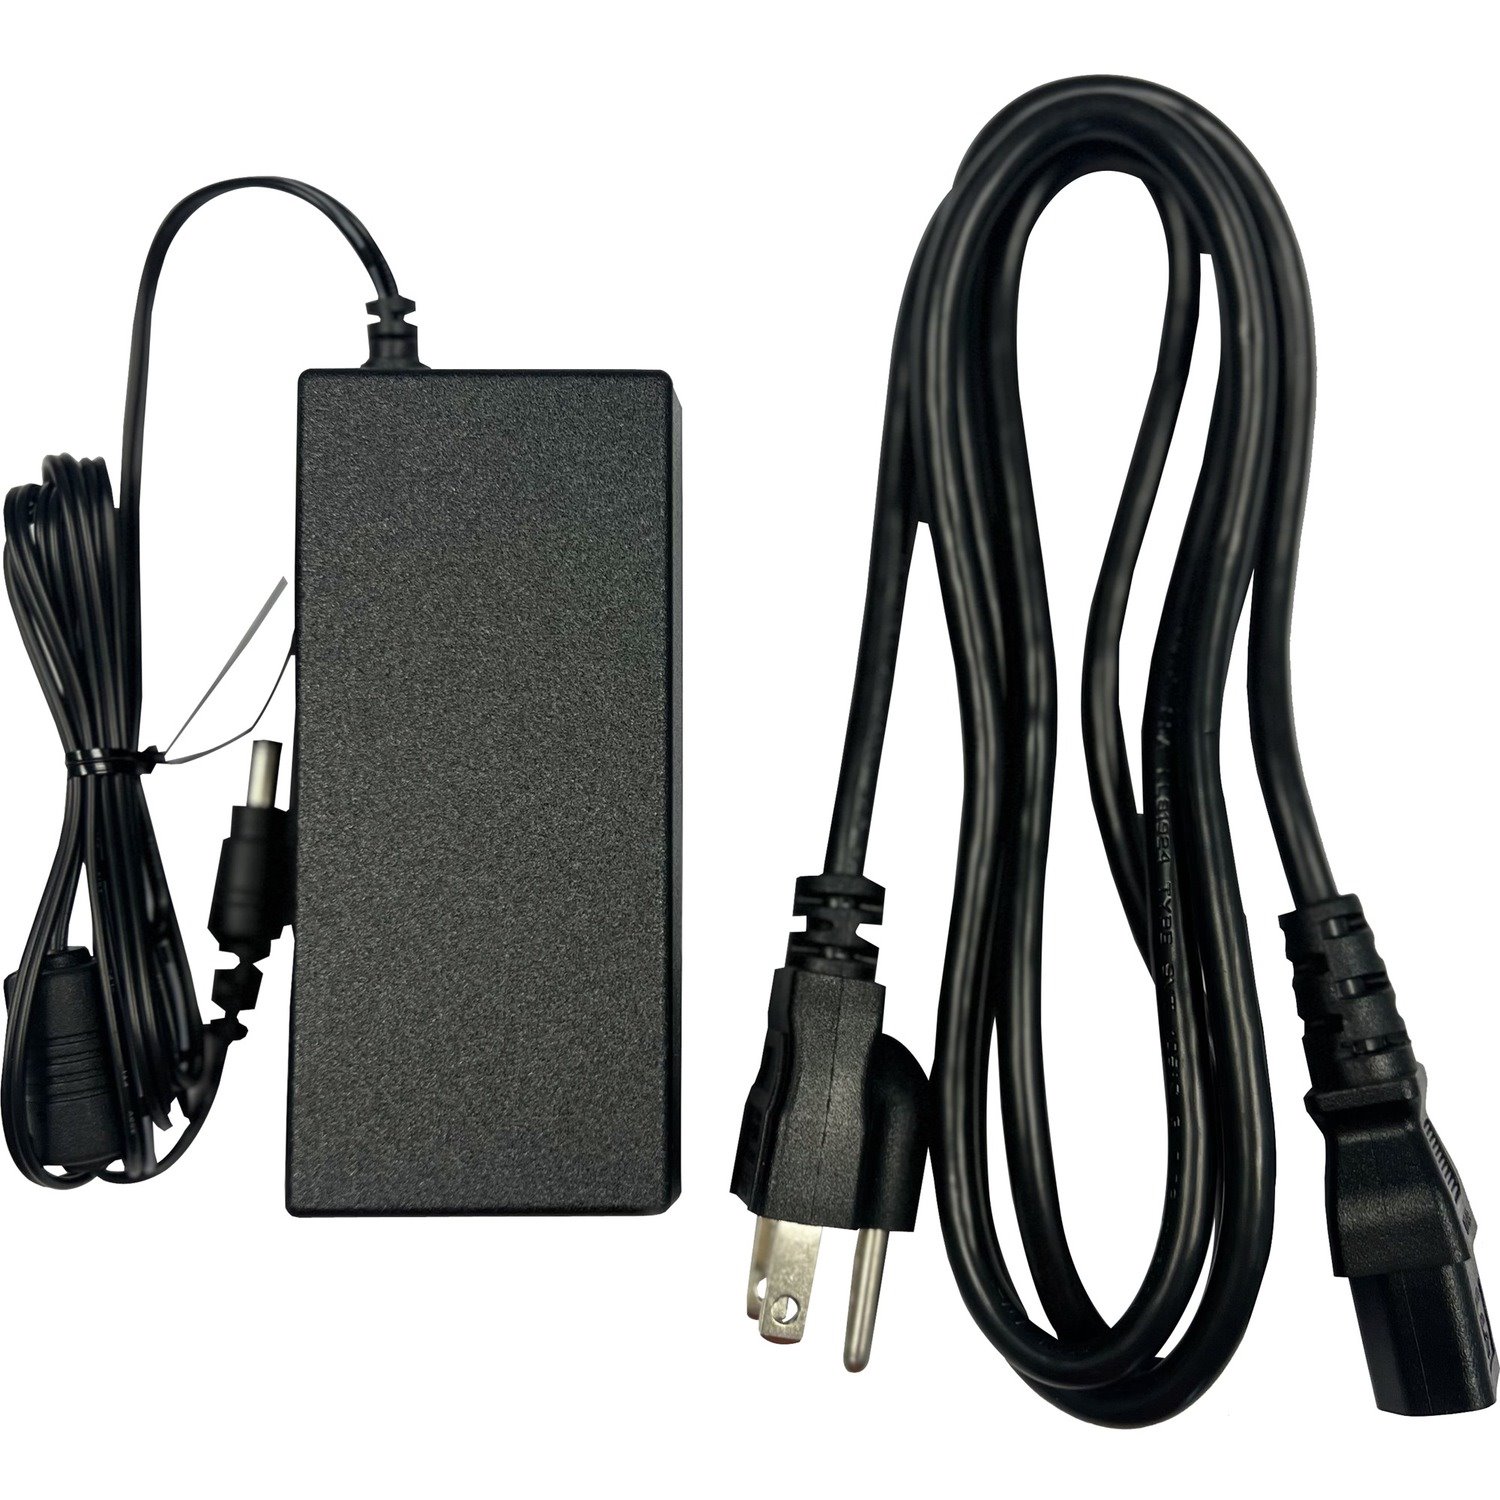 Datto 30W, 48V DC Power Adapter AP840 with US Power Cord